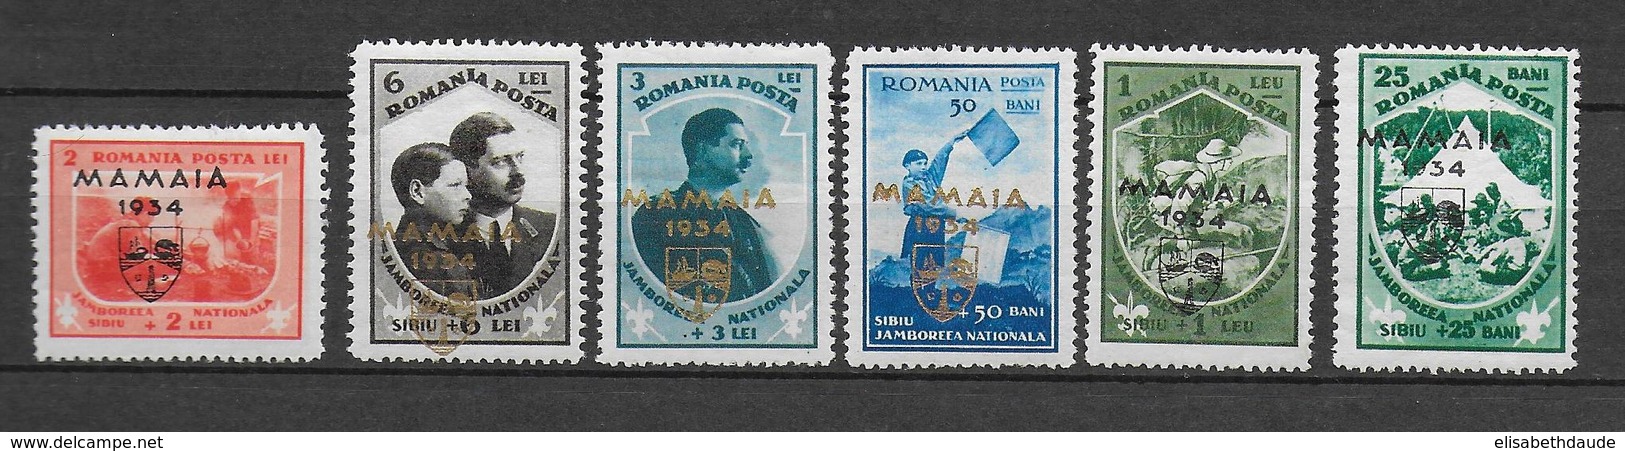 ROUMANIE - 1934 - YVERT 476A/476F * MLH - COTE = 72.5 EUR. - JAMBOREE SCOUT MAMAIA - Unused Stamps